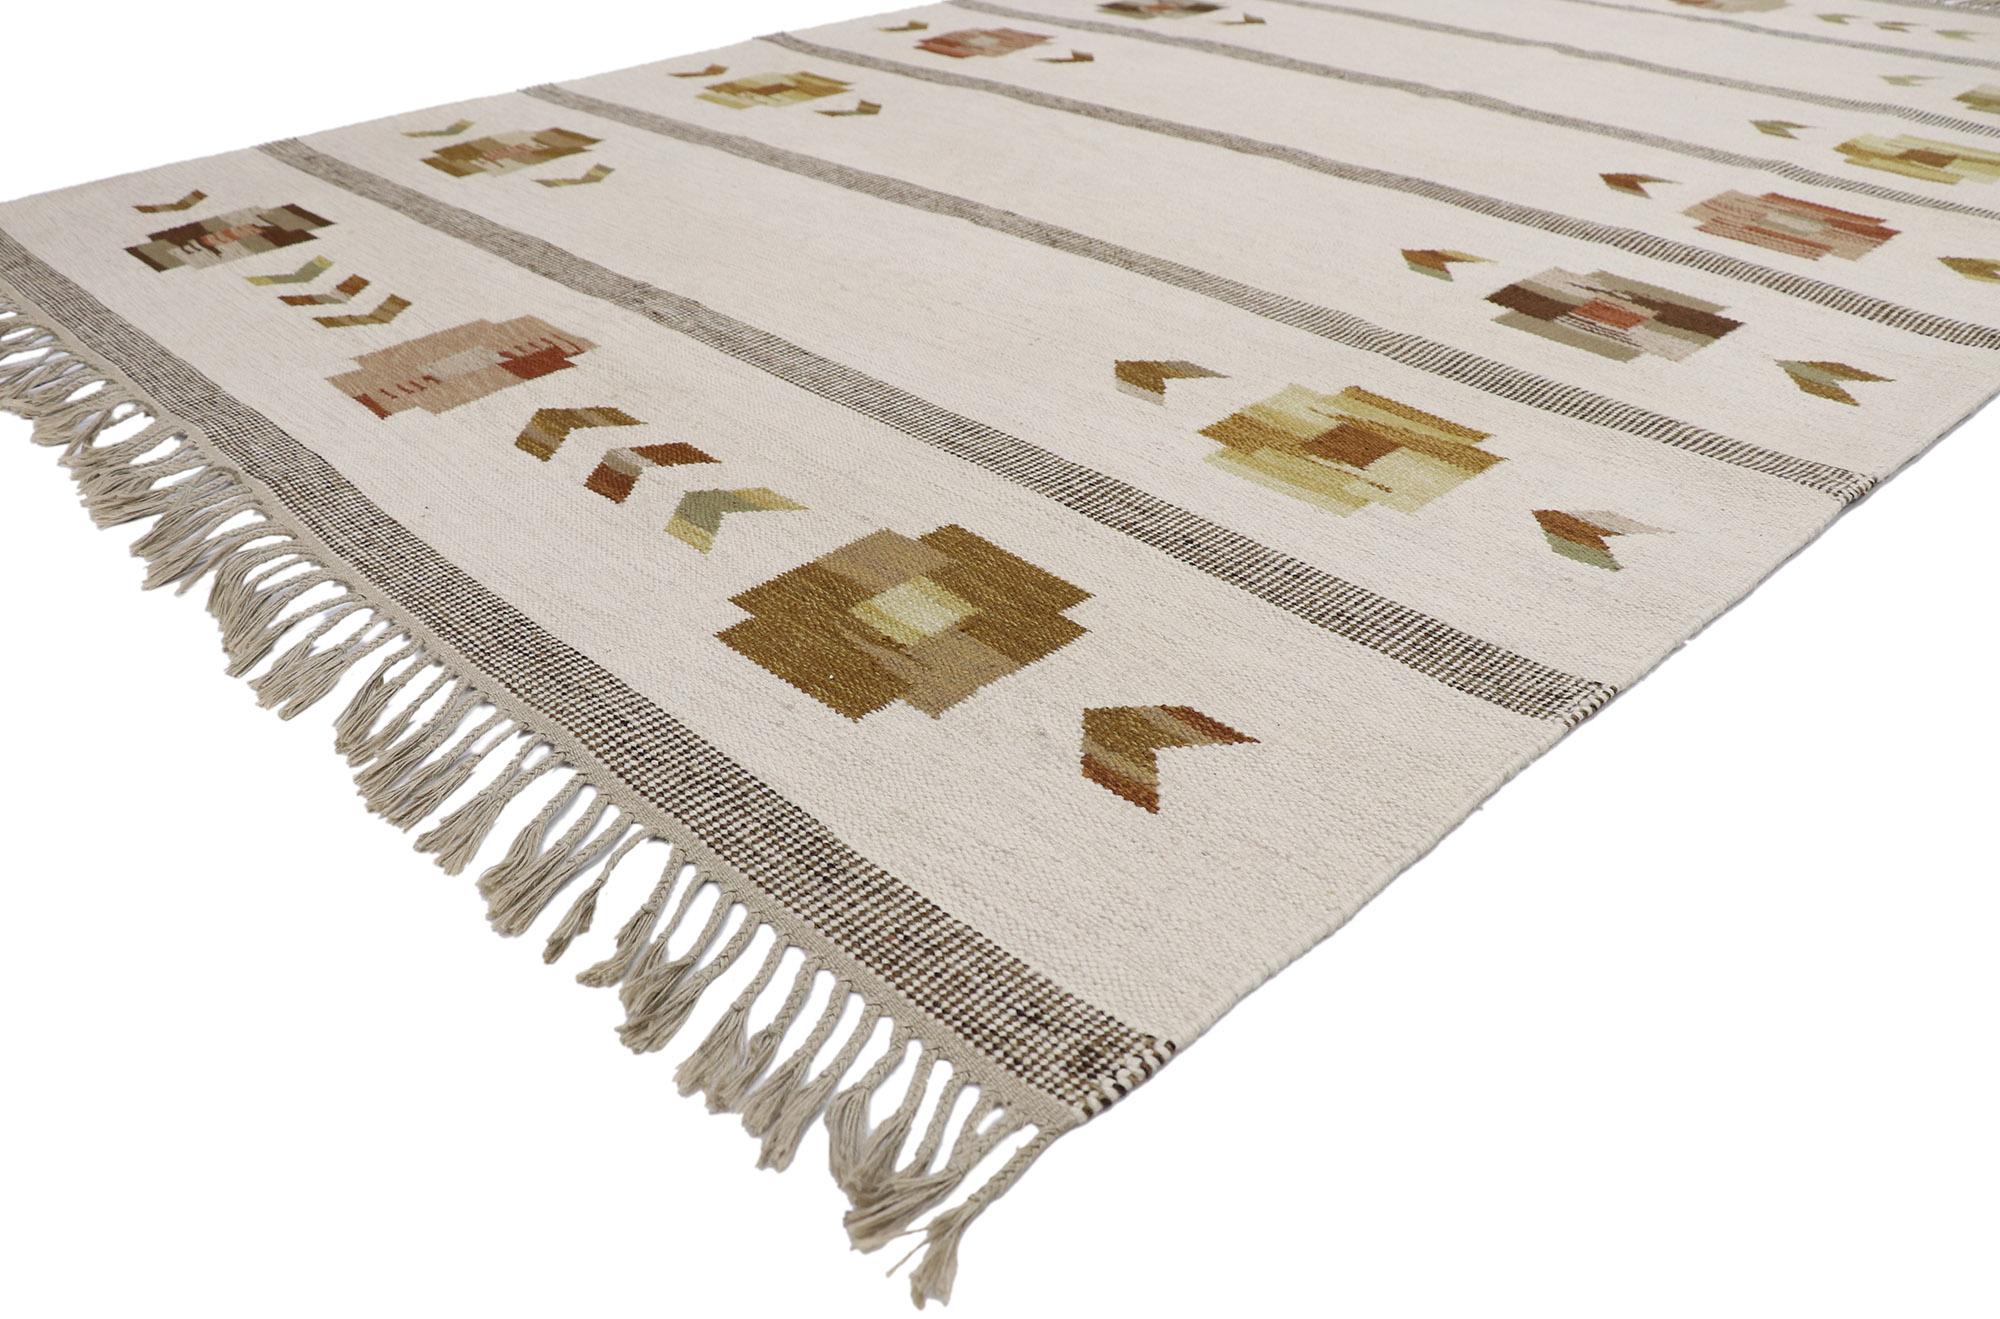 78112 Vintage Swedish Rollakan Kilim rug with Scandinavian Modern Style 06'06 x 10'00. With its geometric design and bohemian hygge vibes, this hand-woven wool Swedish Kilim rug beautifully embodies the simplicity of Scandinavian modern style. The